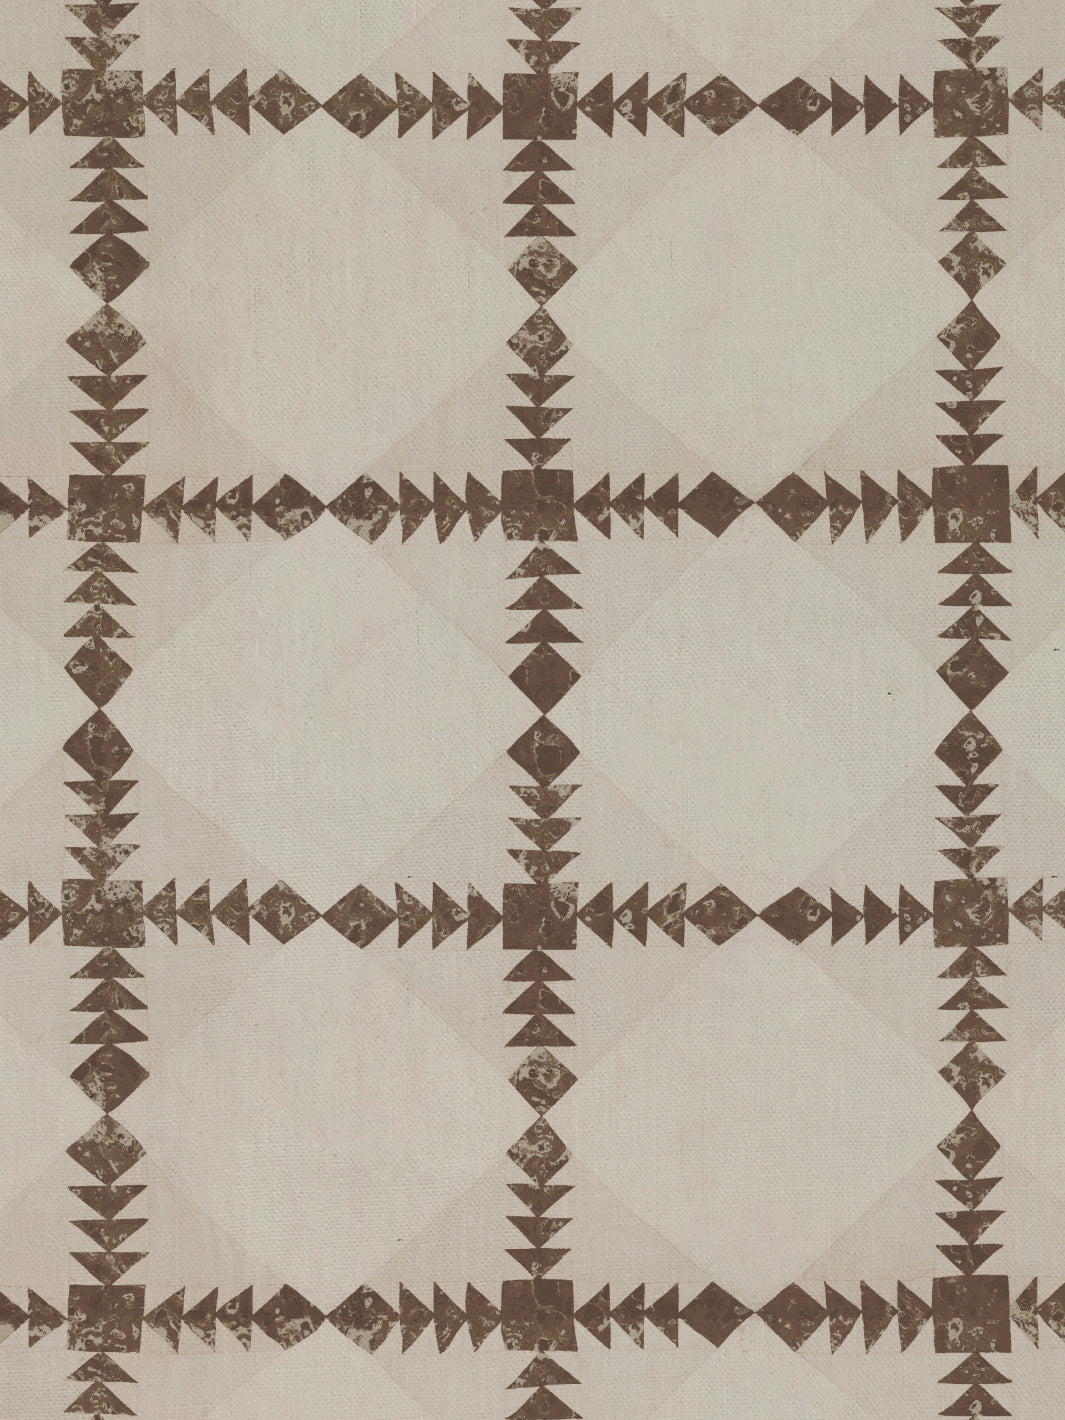 'Borden' Linen Fabric by Nathan Turner - Brown